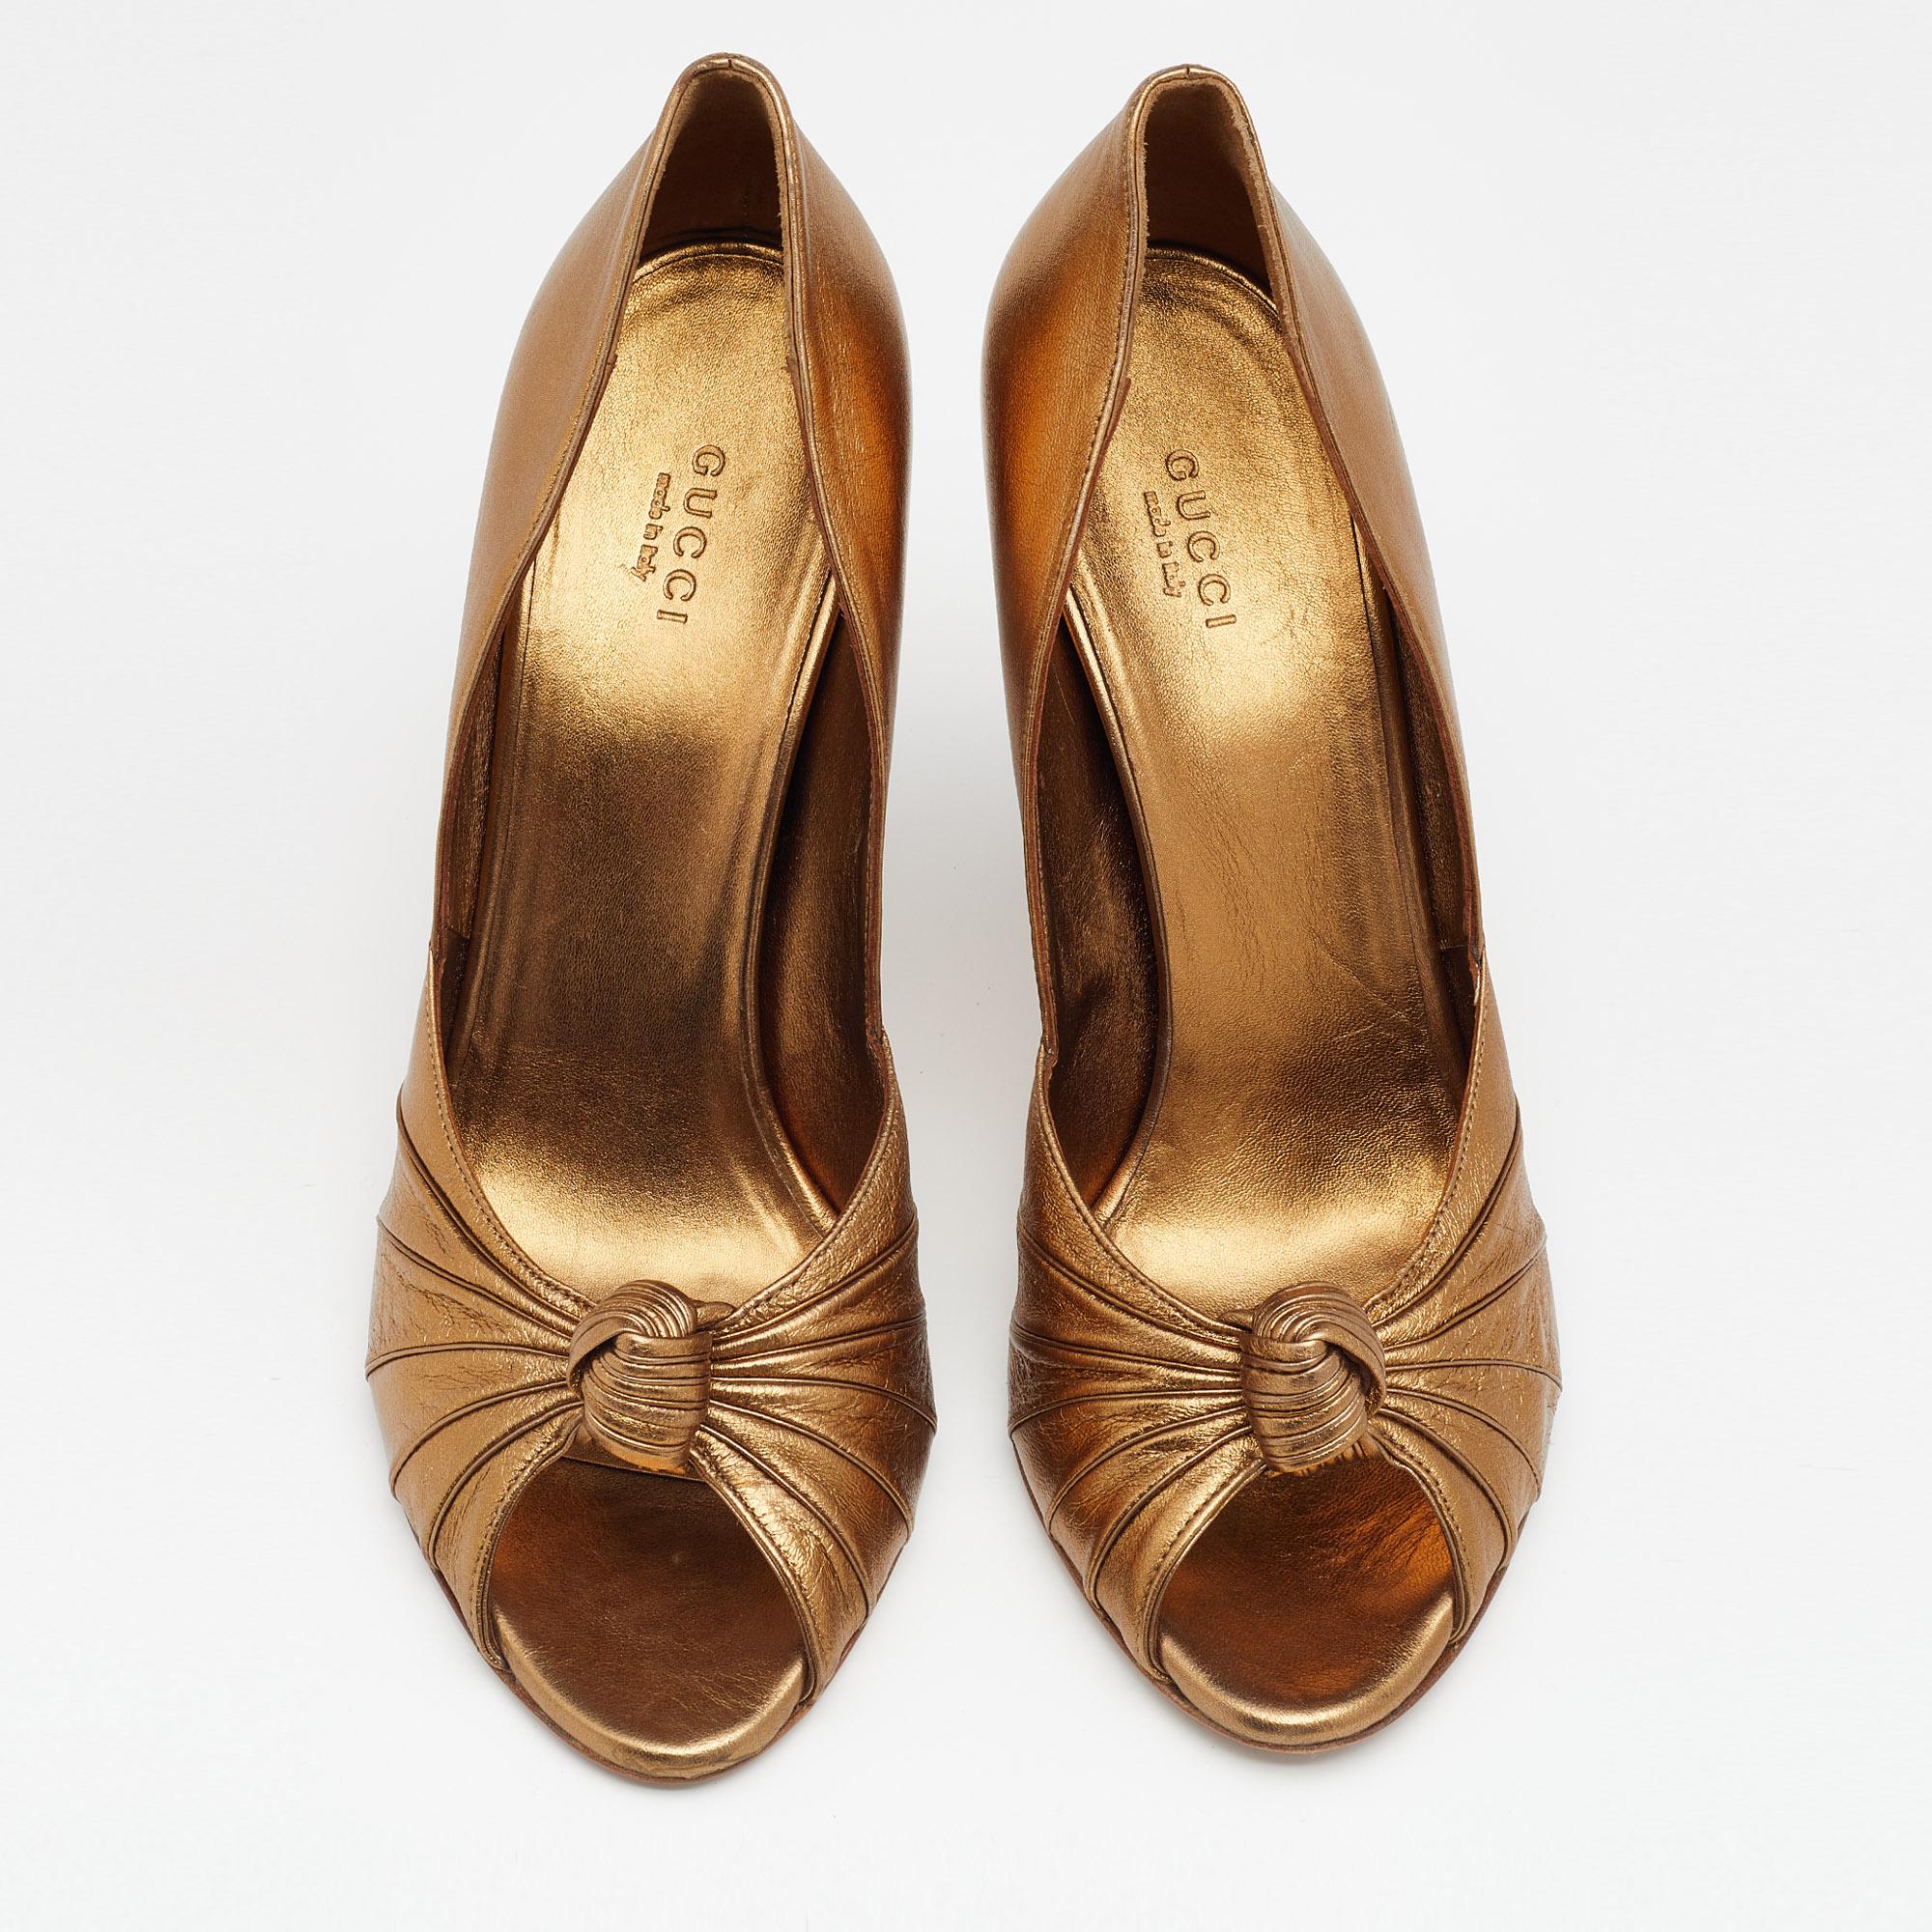 Gucci Metallic Gold Leather Knotted Peep Toe Pumps Size 40 In Good Condition For Sale In Dubai, Al Qouz 2